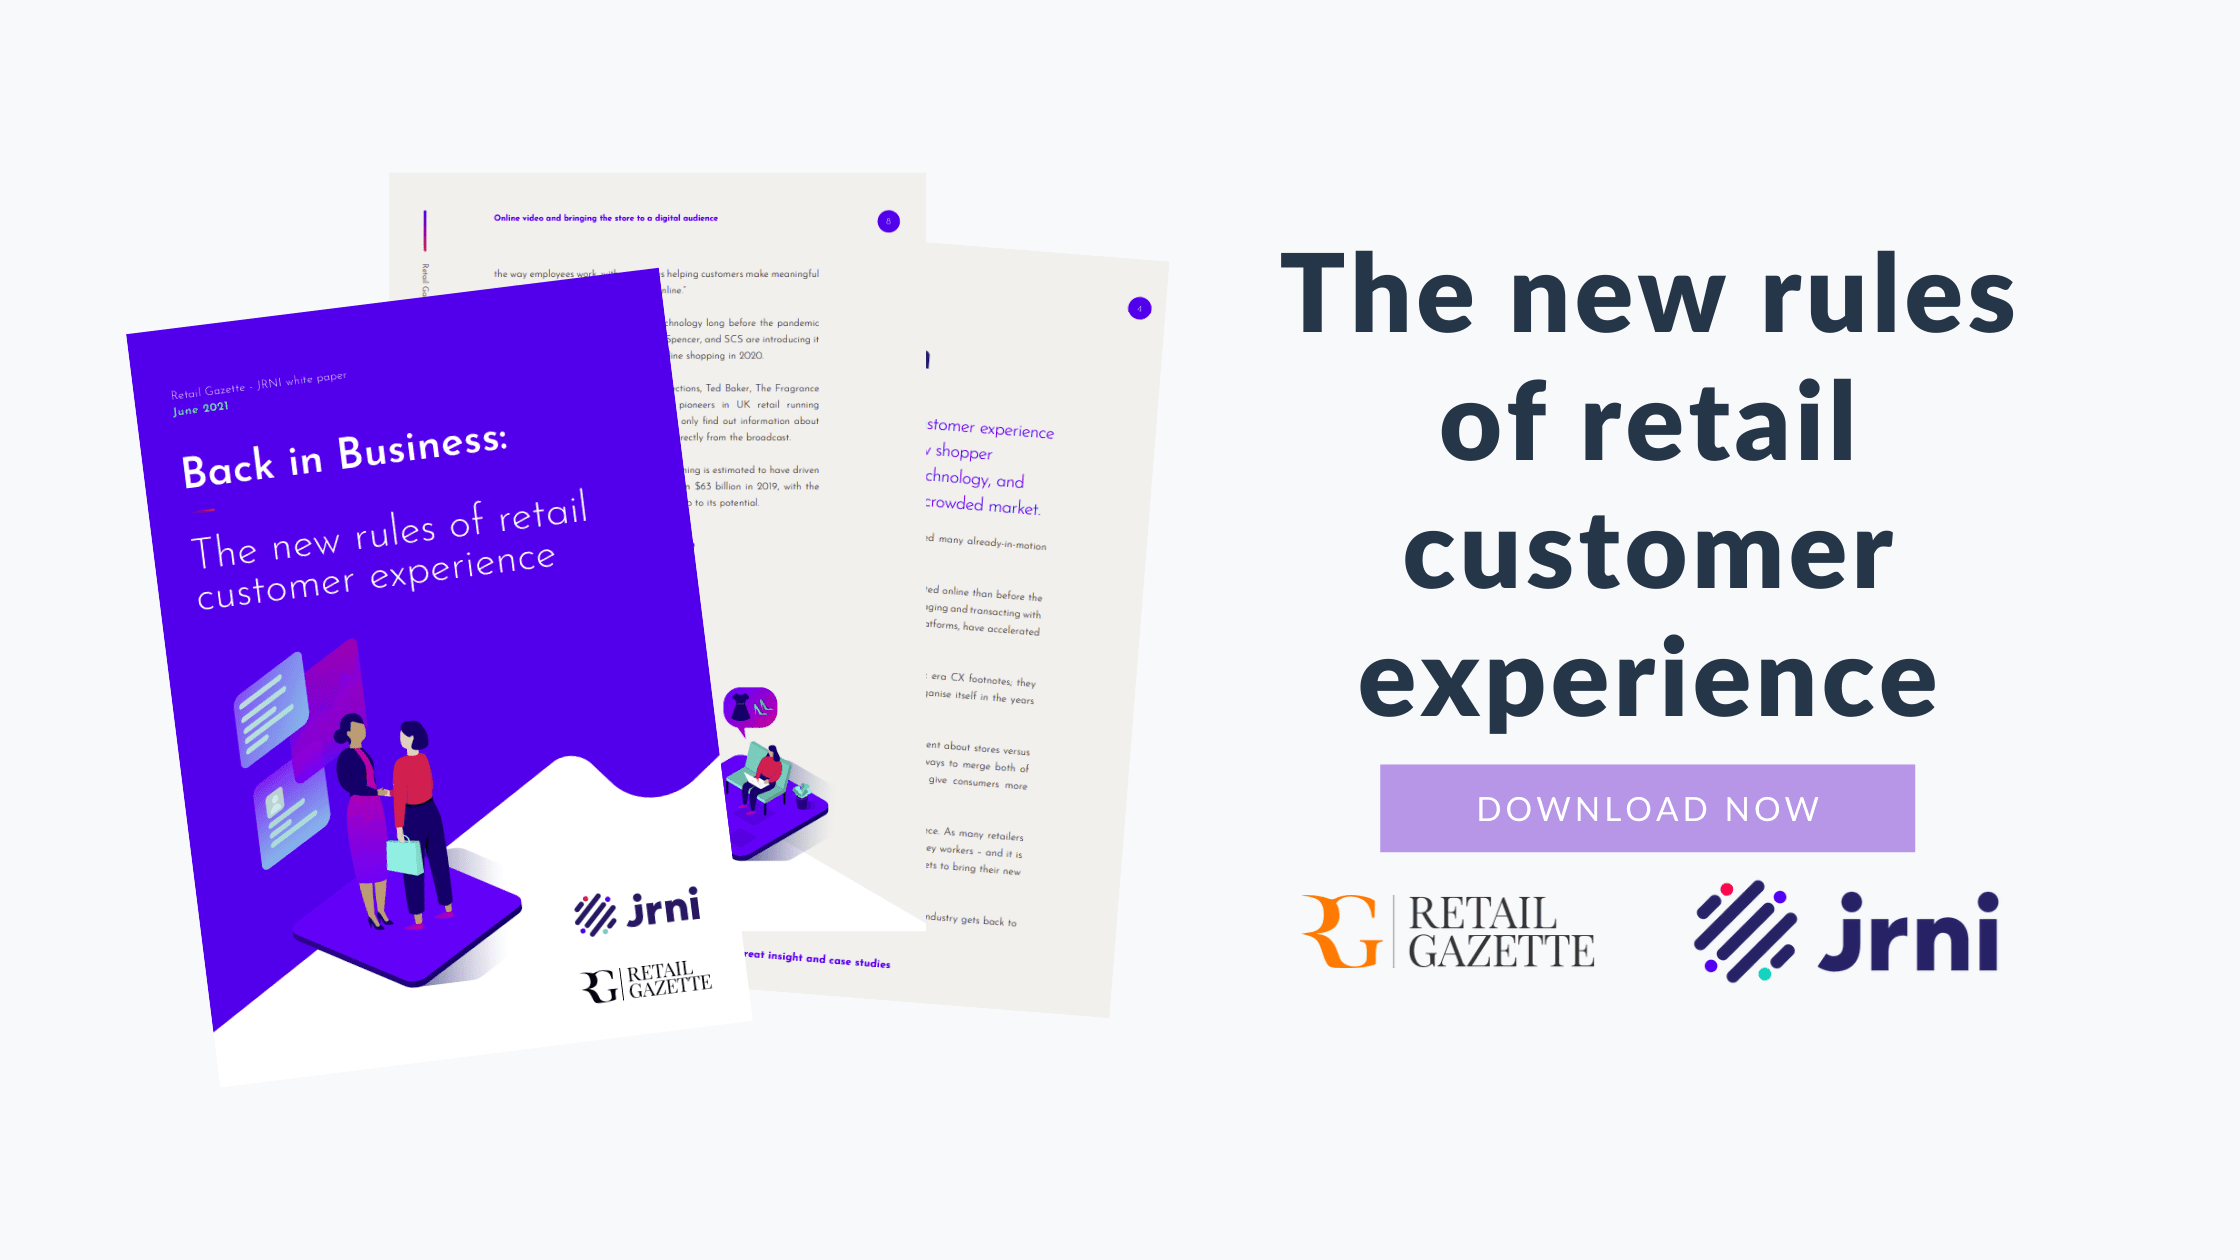 The new rules of retail customer experience - download the free white paper!